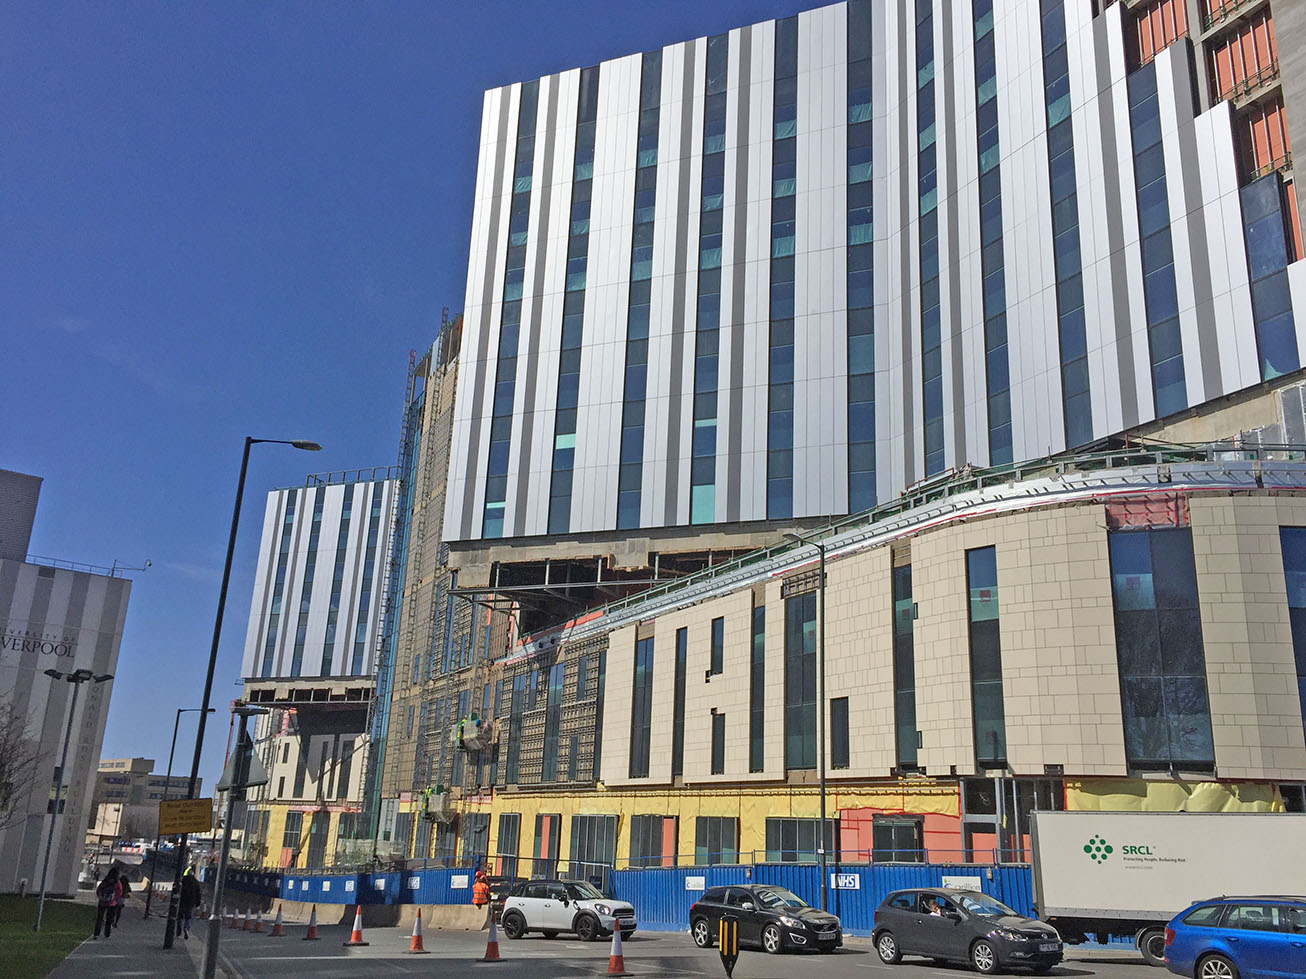 Complete Drainage Solution for the new Royal Liverpool University Hospital from Saint Gobain PAM